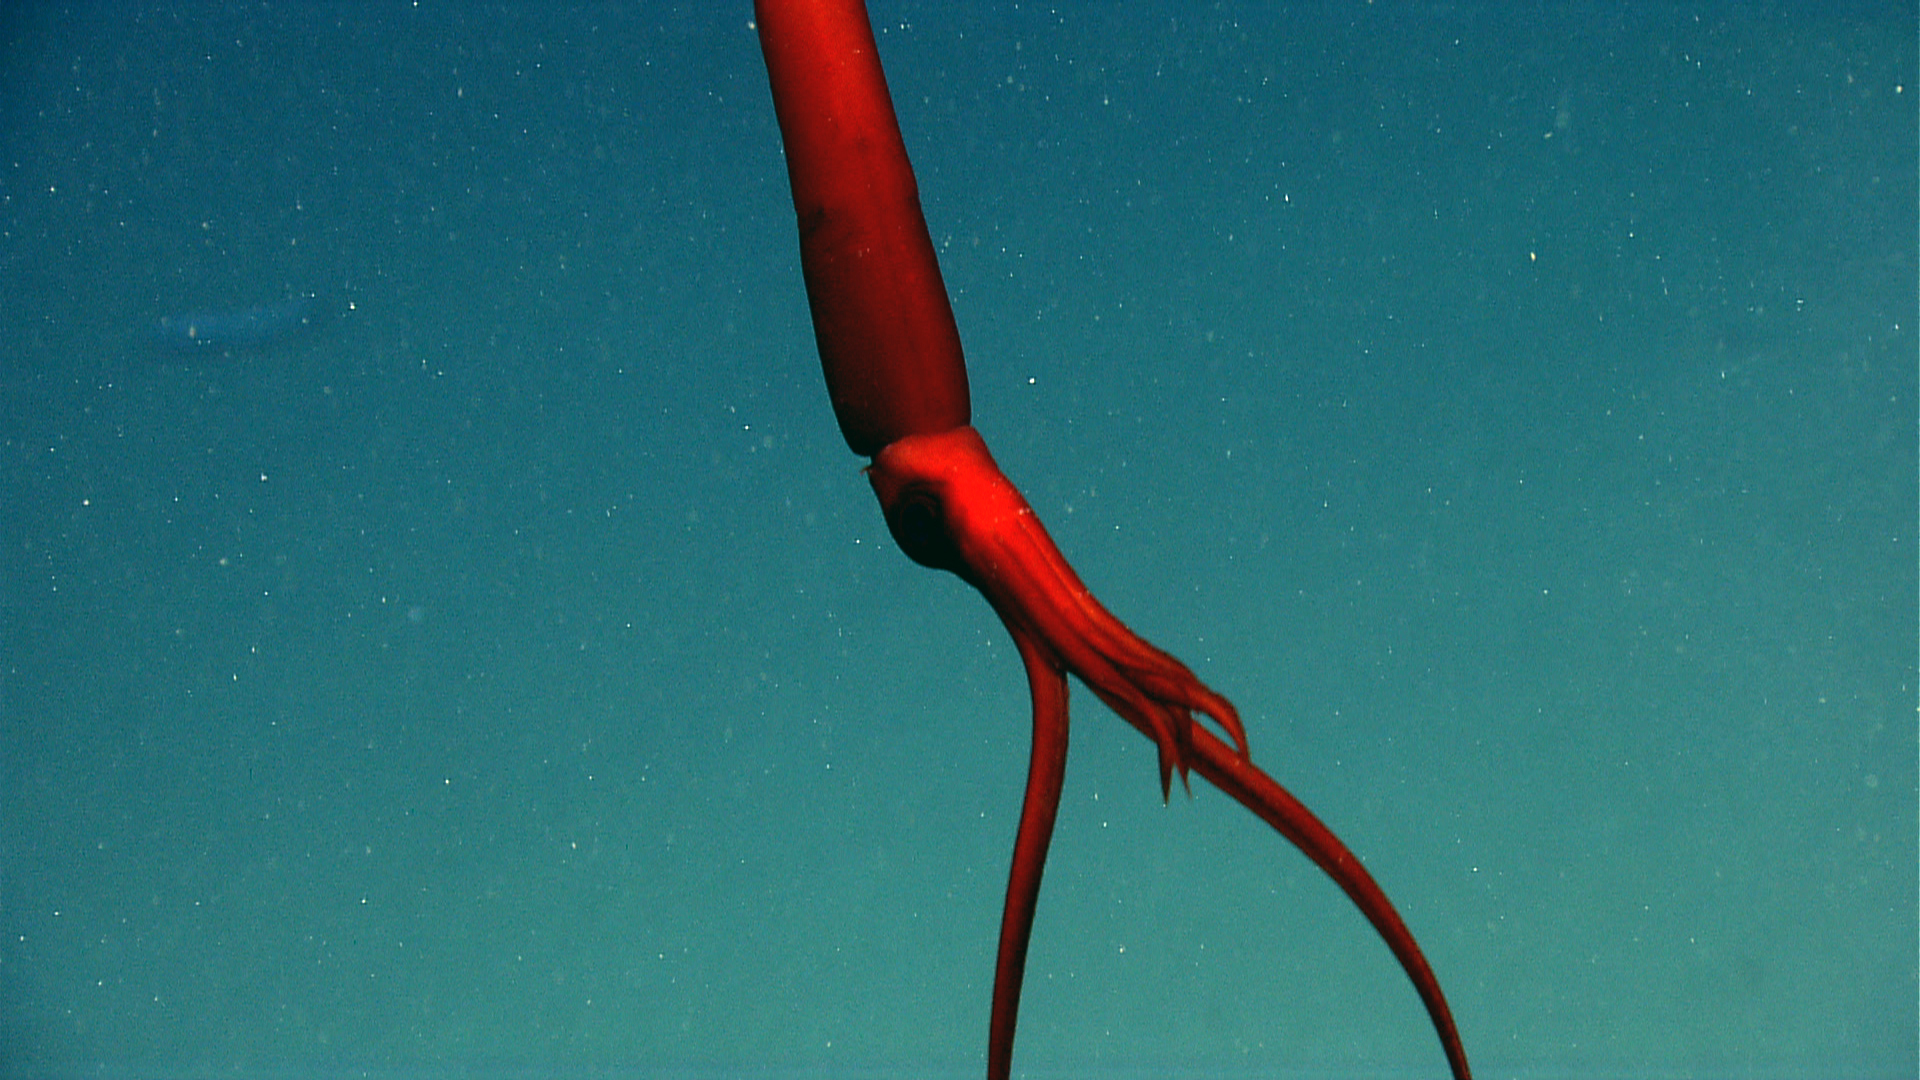 This striking deep-sea squid was photographed in what is called a “tuning fork” position, with each tentacle held rigid to catch its prey.